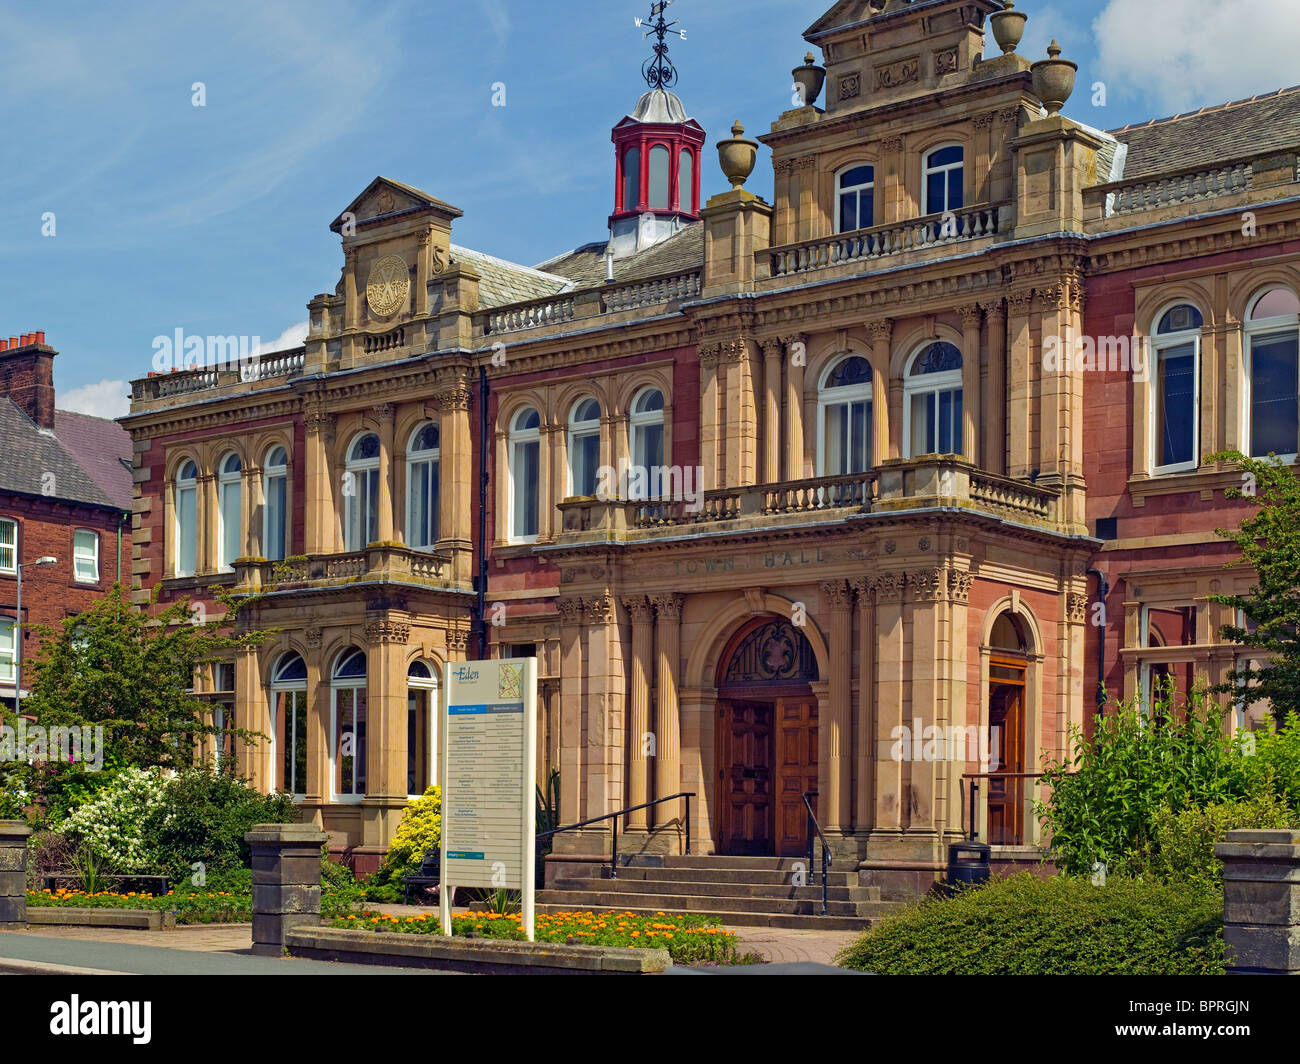 Penrith Town Hall local government building Cumbria England UK United Kingdom Great Britain GB Stock Photo